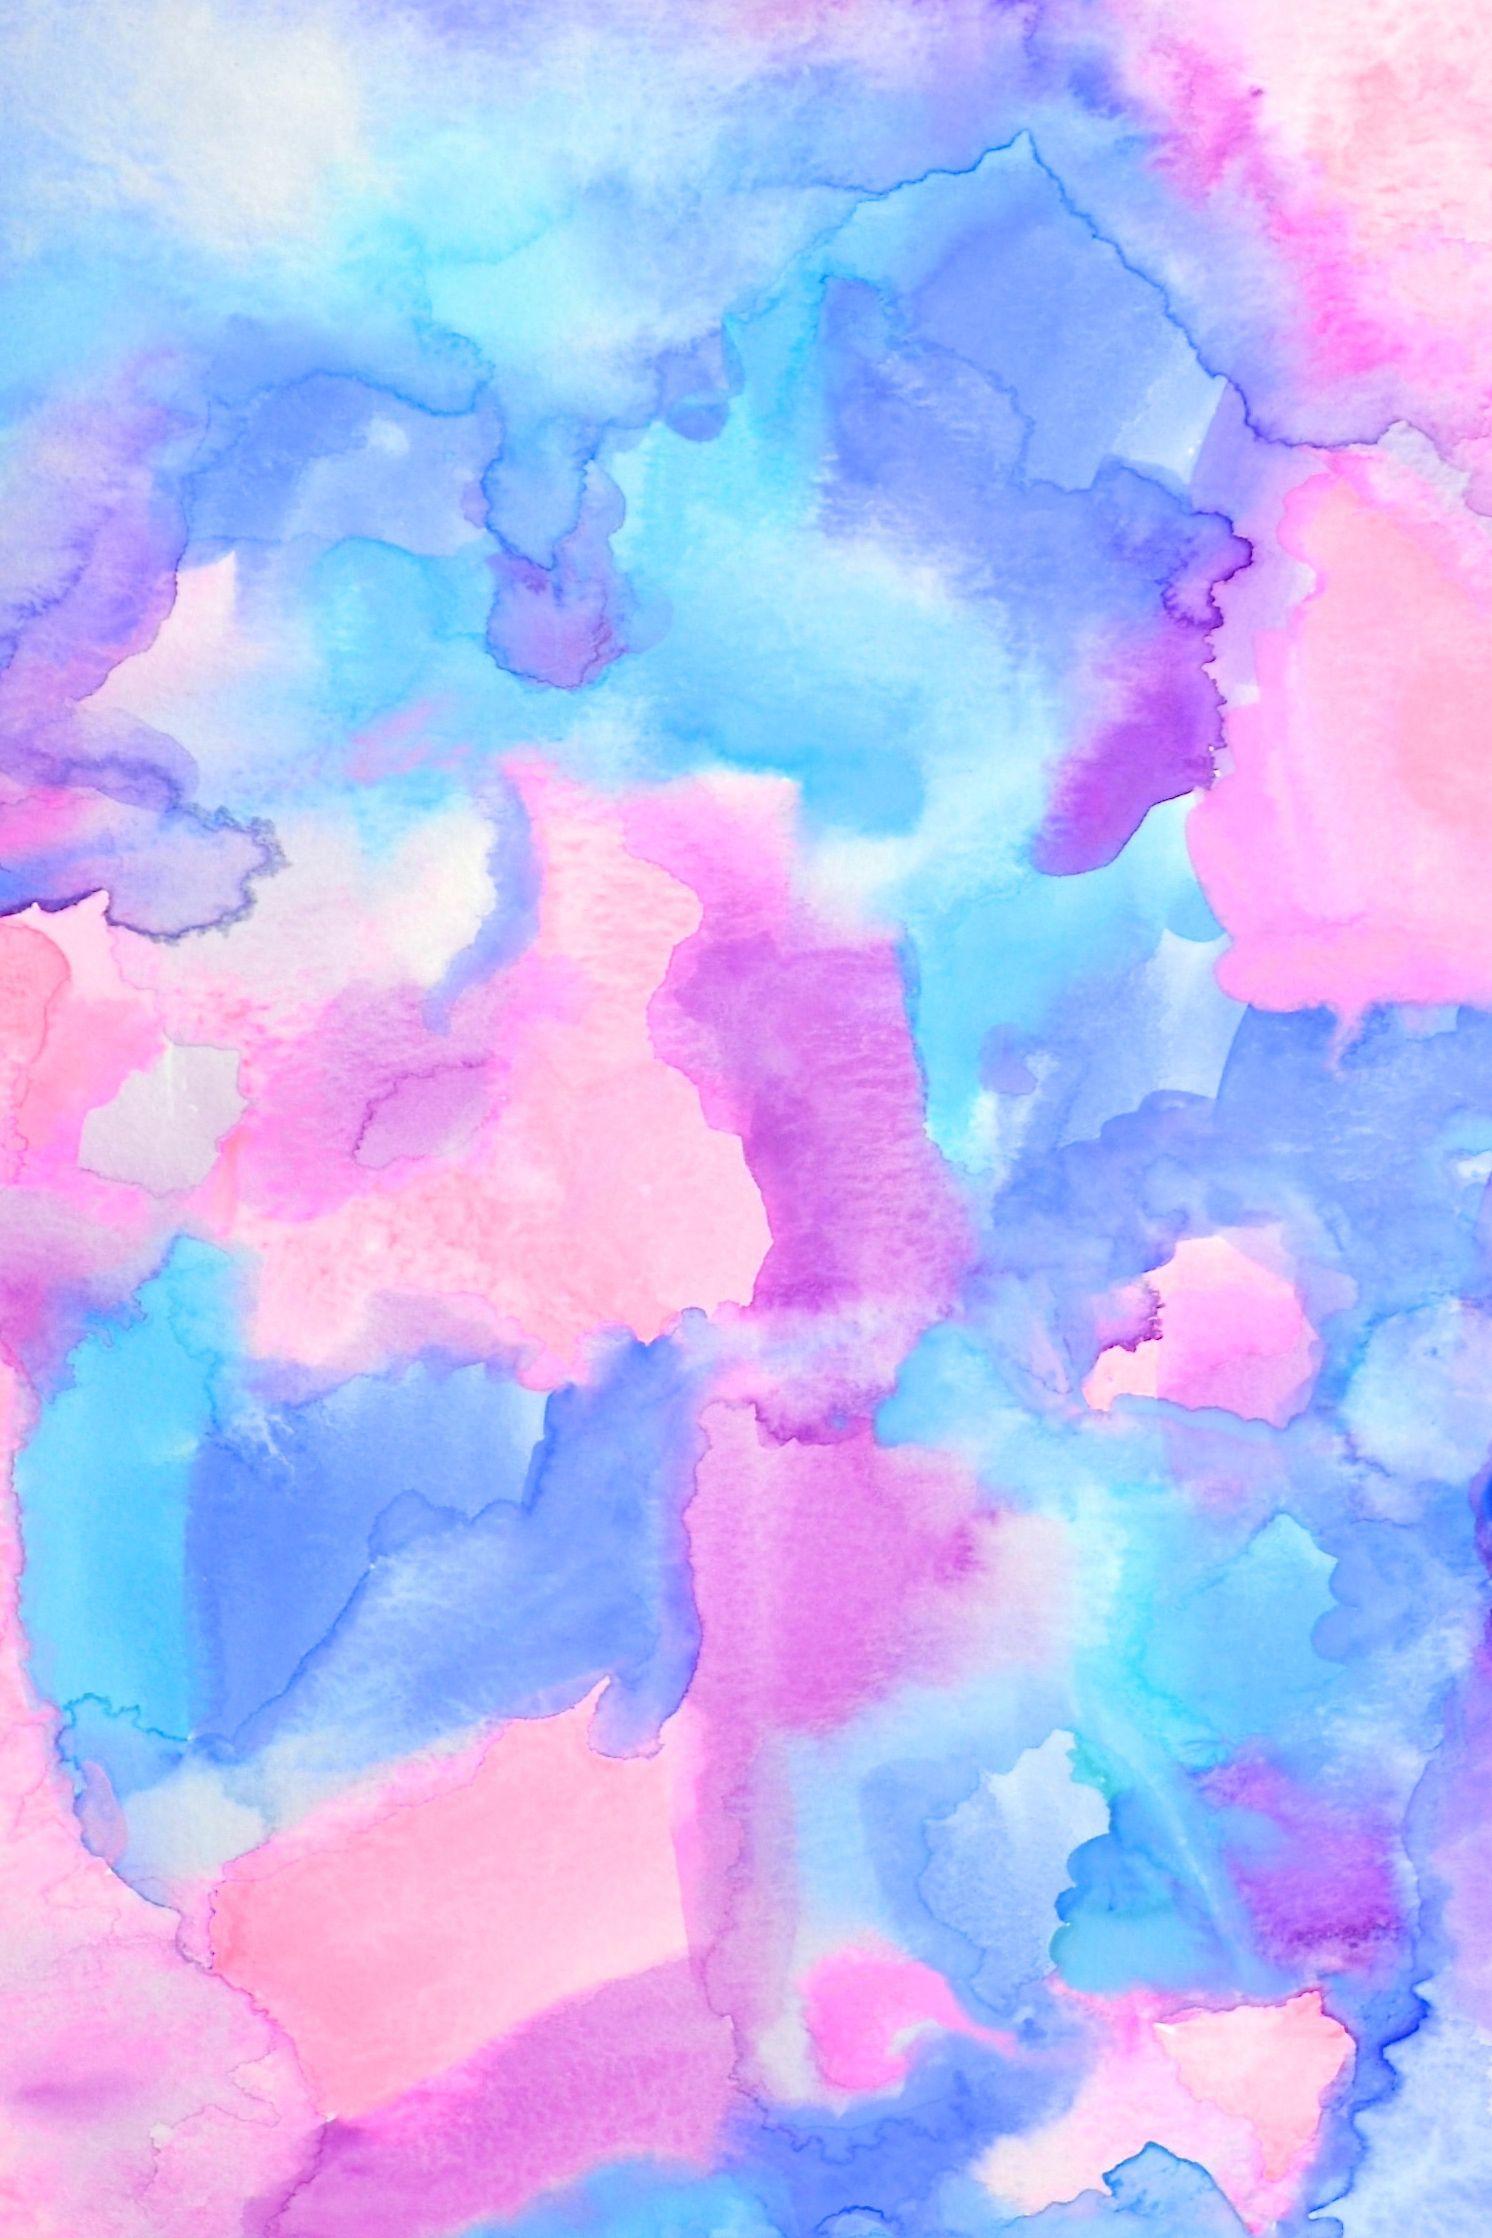 HDWP 40: Watercolor Wallpaper, Watercolor Collection Of Widescreen